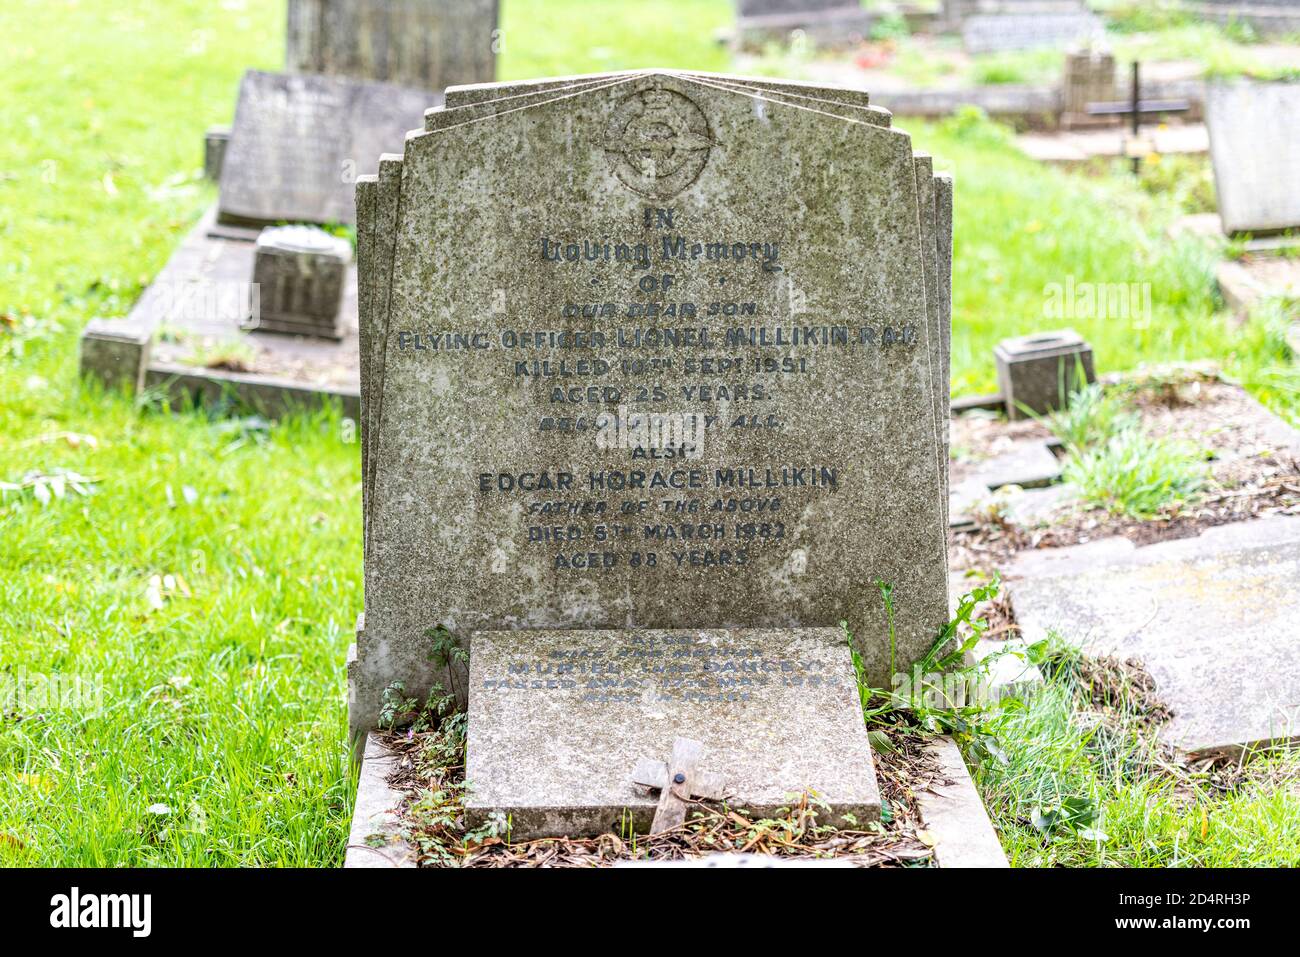 Headstone, gravestone on grave of RAF Flying Officer pilot Lionel Millikin at St Laurence & All Saints Church. Crashed Gloster Meteor jet in Westcliff Stock Photo